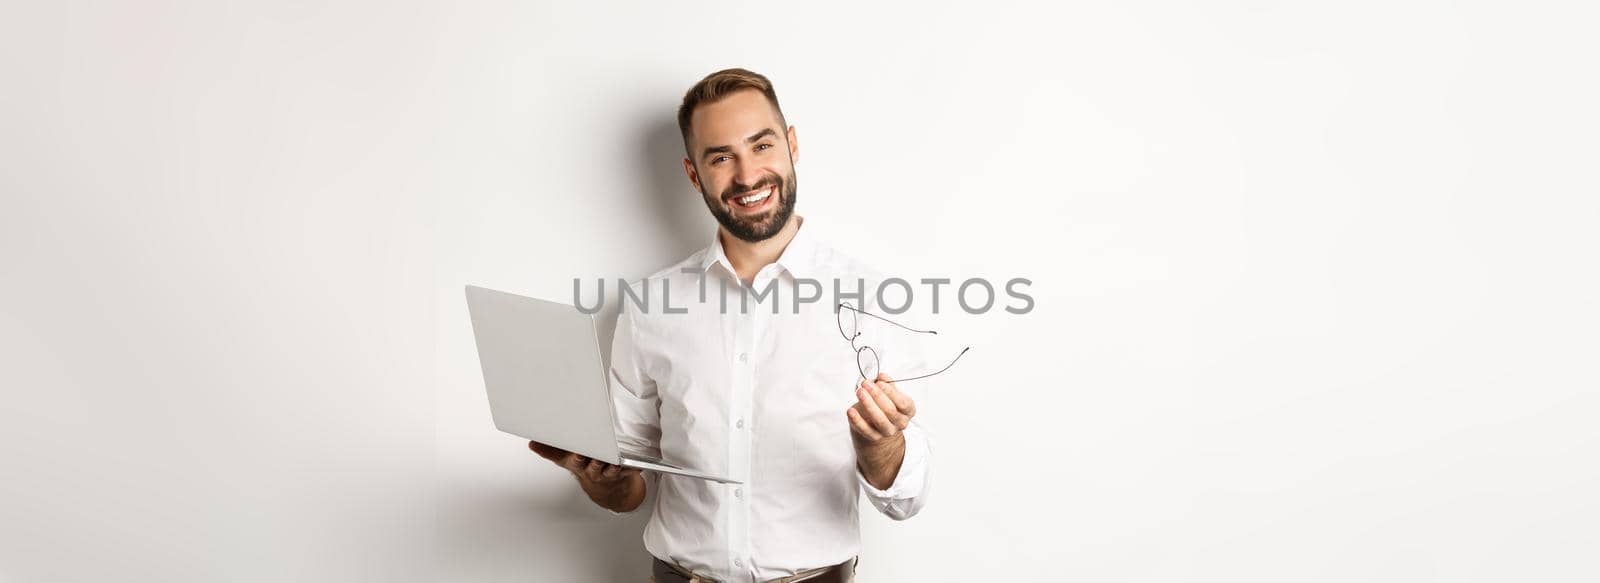 Satisfied businessman praising good job while checking laptop, standing over white background. Copy space